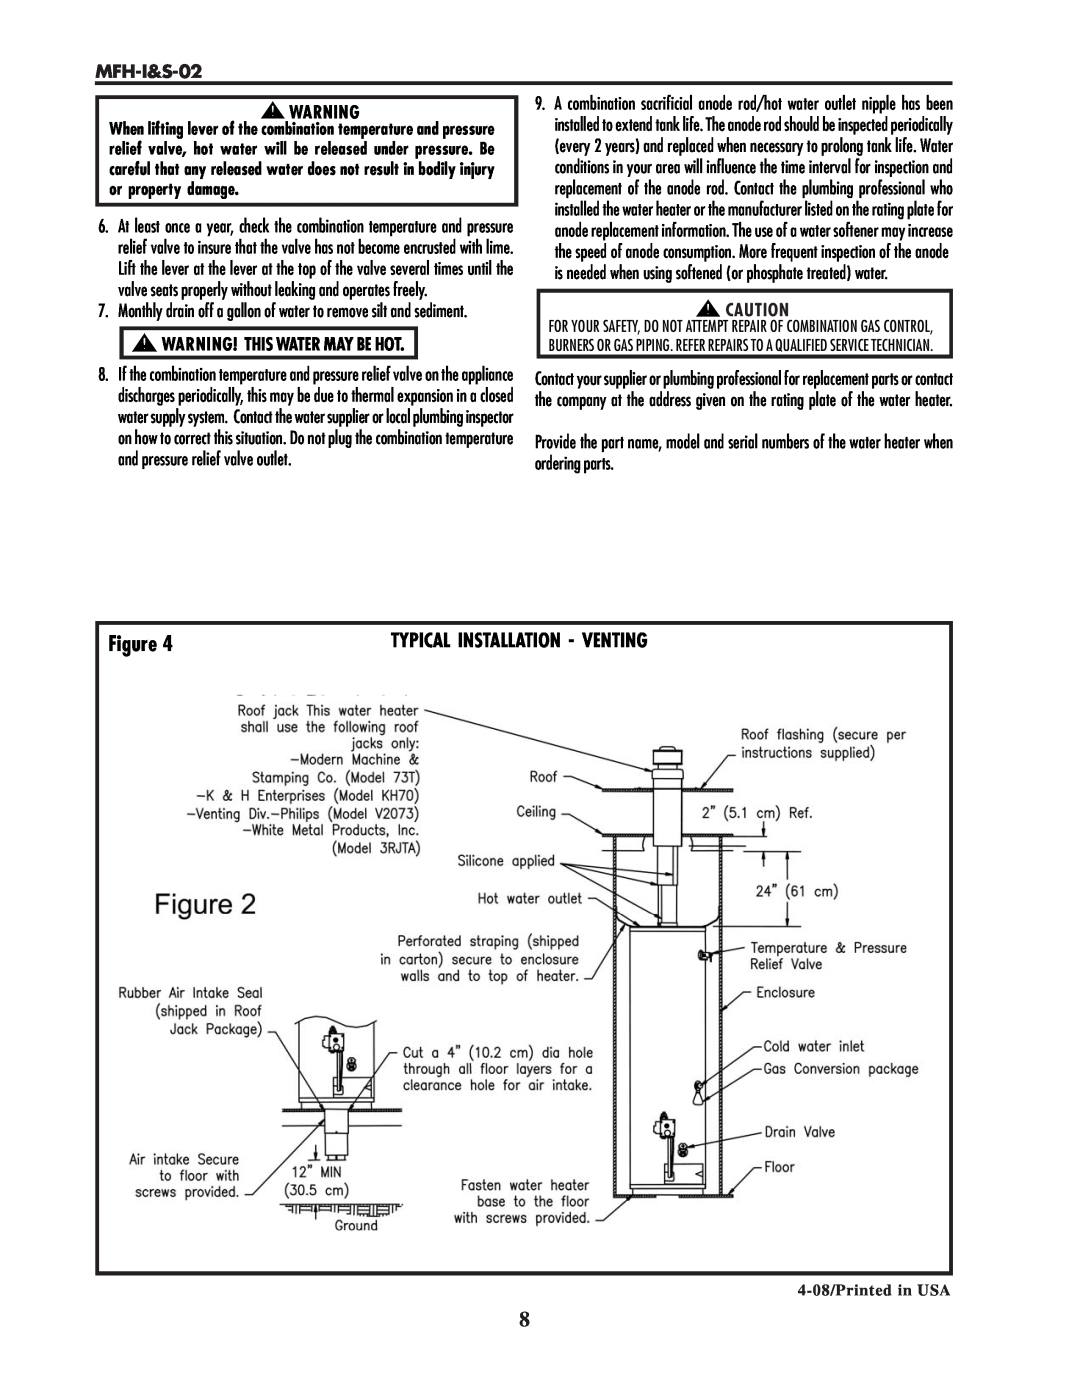 Lochinvar MFH-I&S-02 service manual or property damage, Warning! This Water May Be Hot, Typical Installation - Venting 